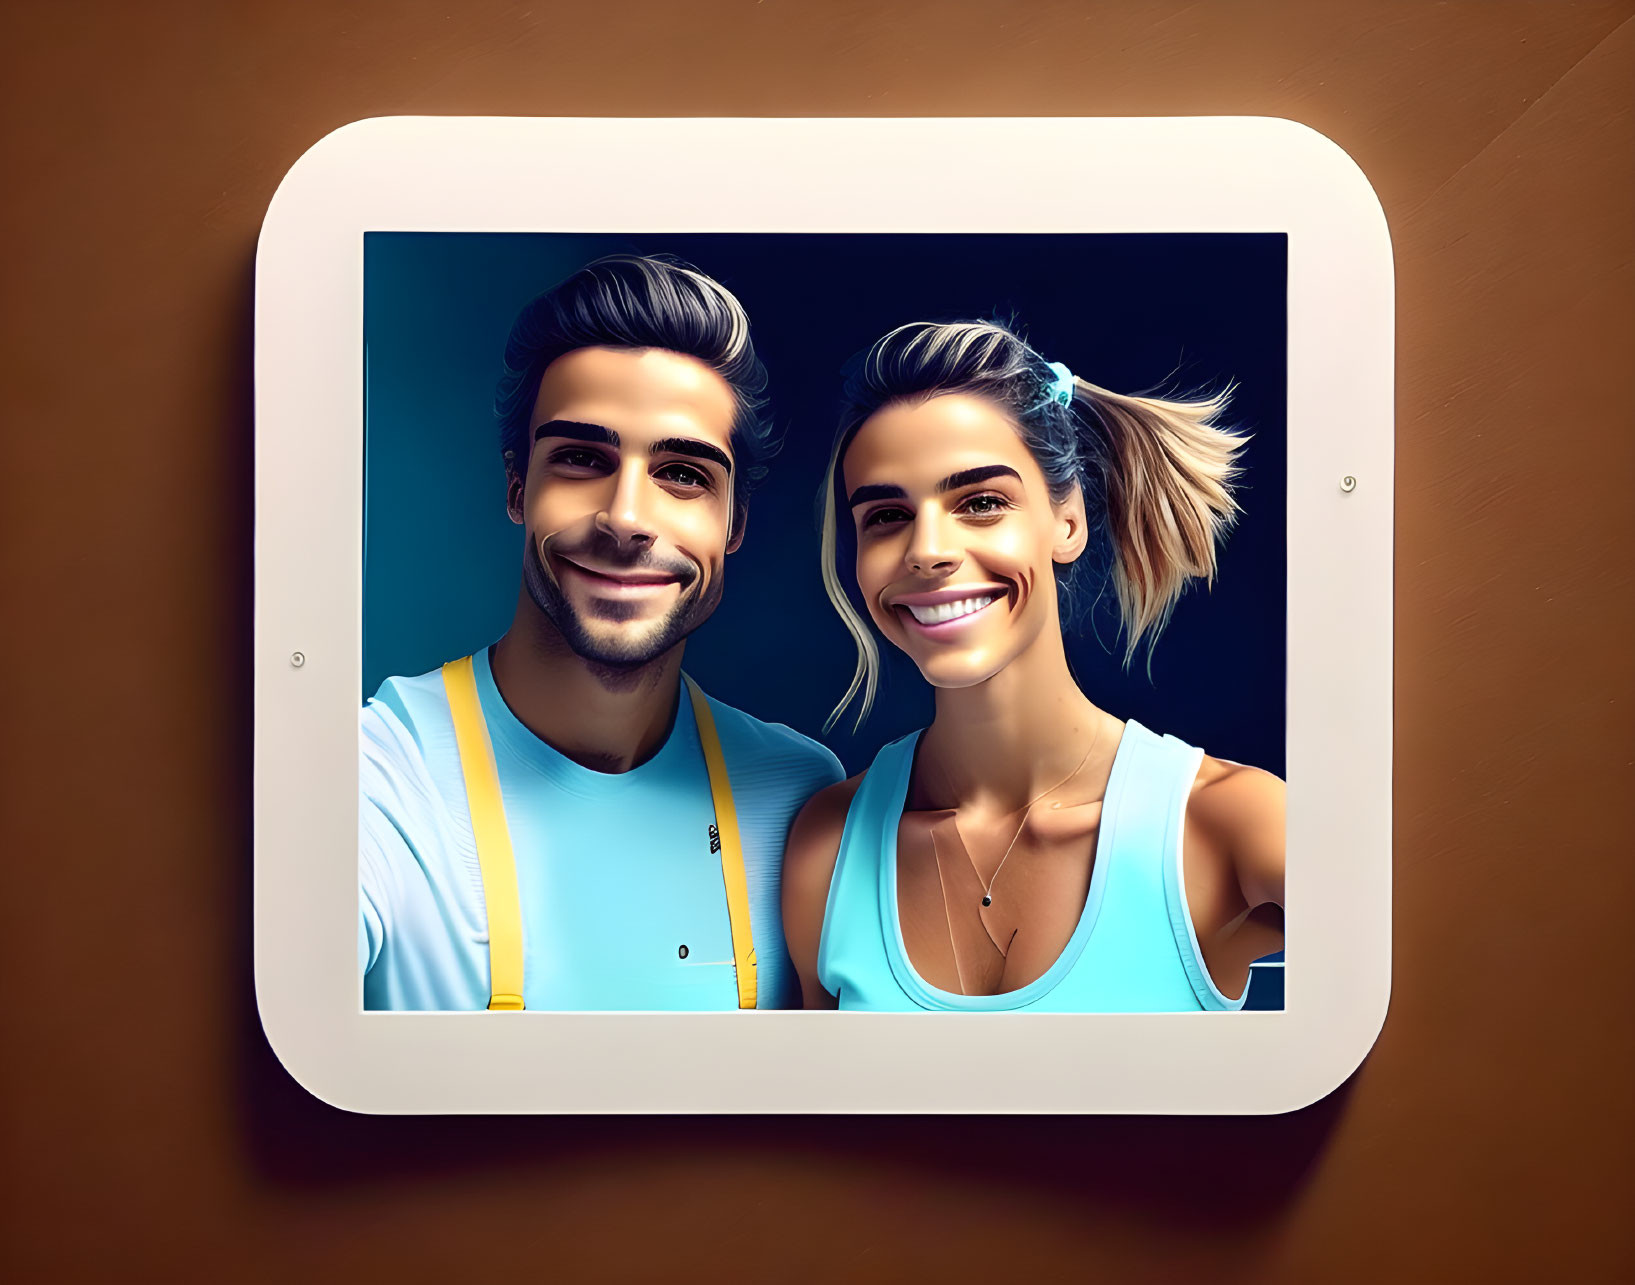 Smiling man and woman digital portrait on tablet against brown background